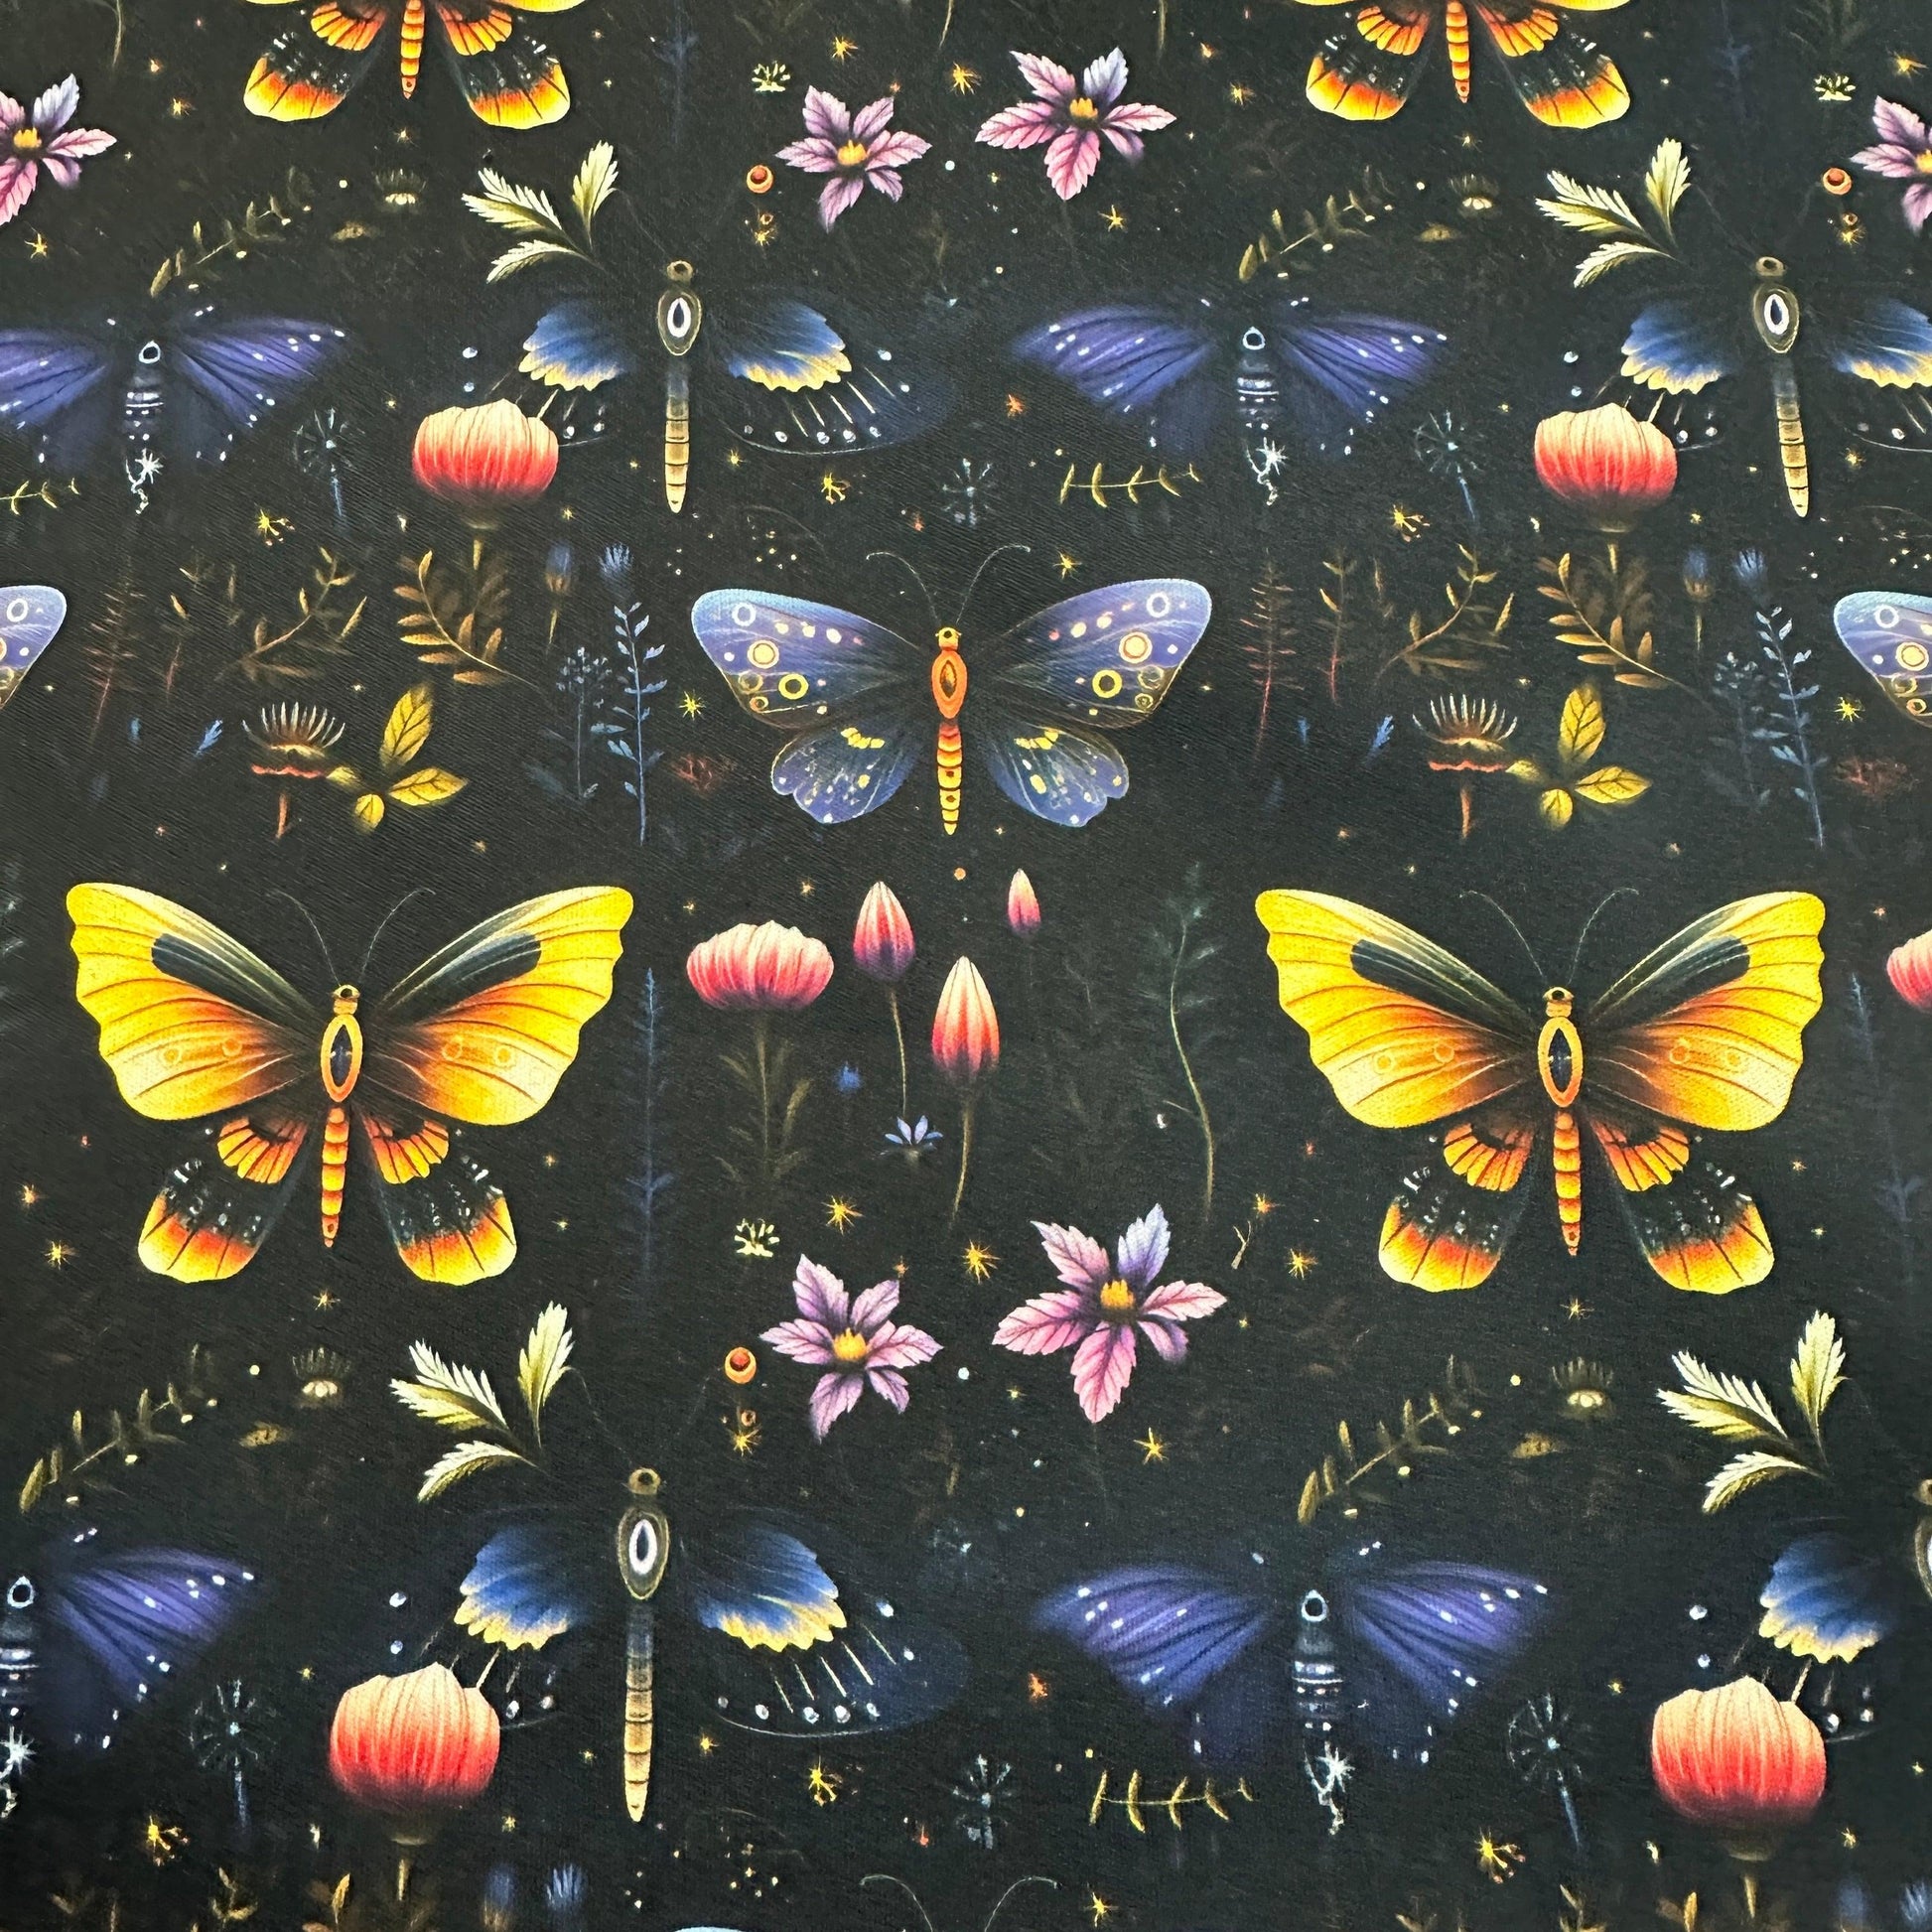 Mystical Moths 1 mil PUL Fabric - Made in the USA - Nature's Fabrics